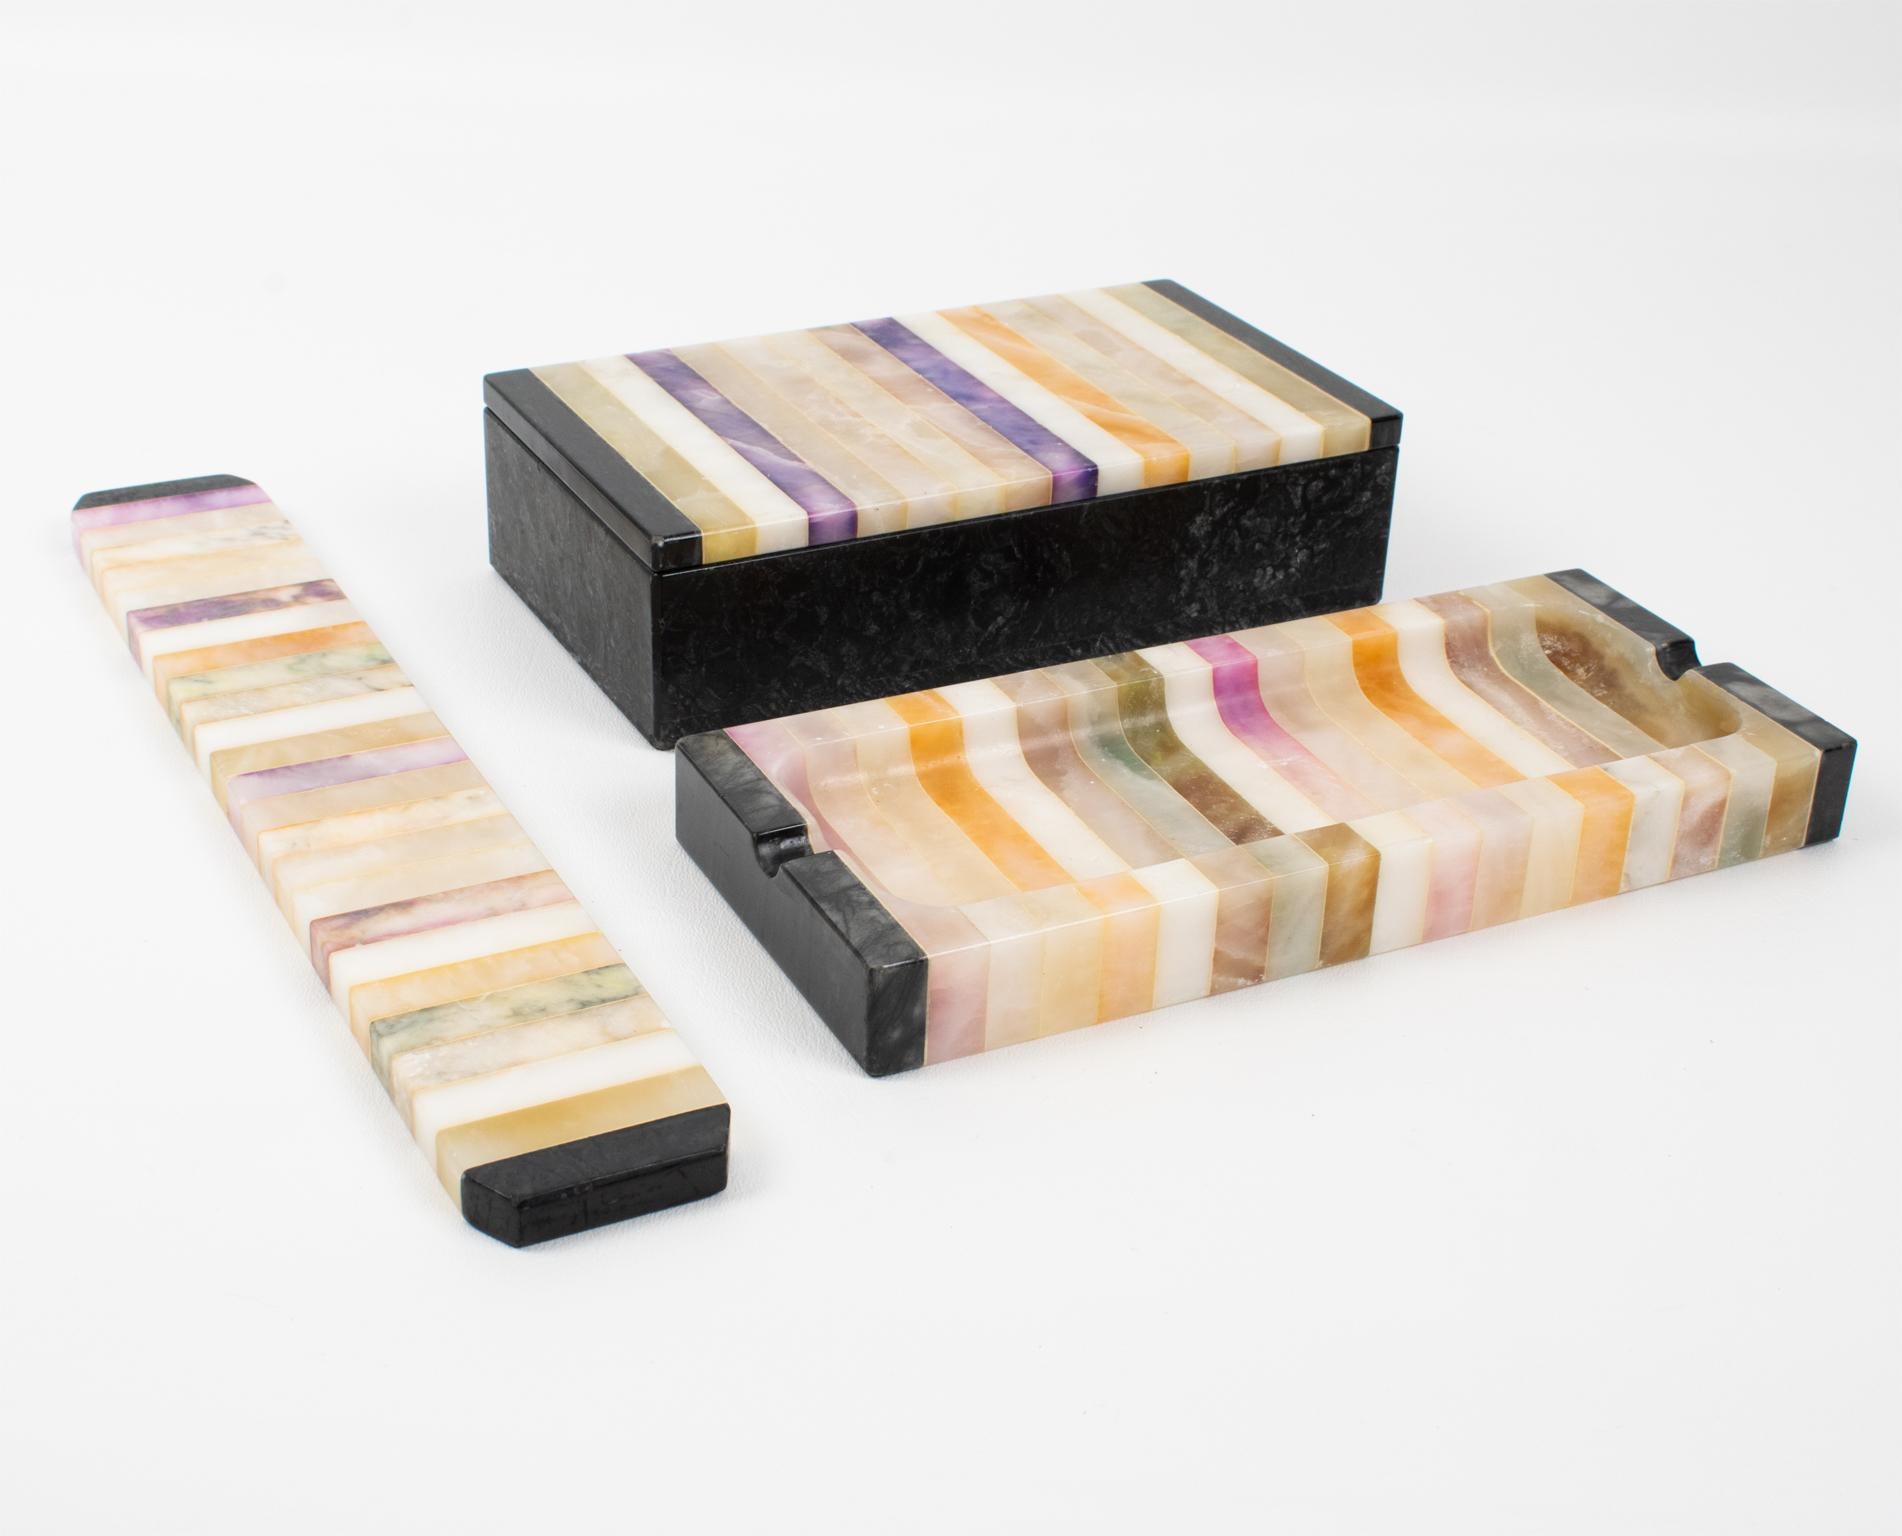 Italian Mid-Century Marble, Onyx Marquetry Desk Set Box, Pen Holder, Ruler, Italy 1960s For Sale